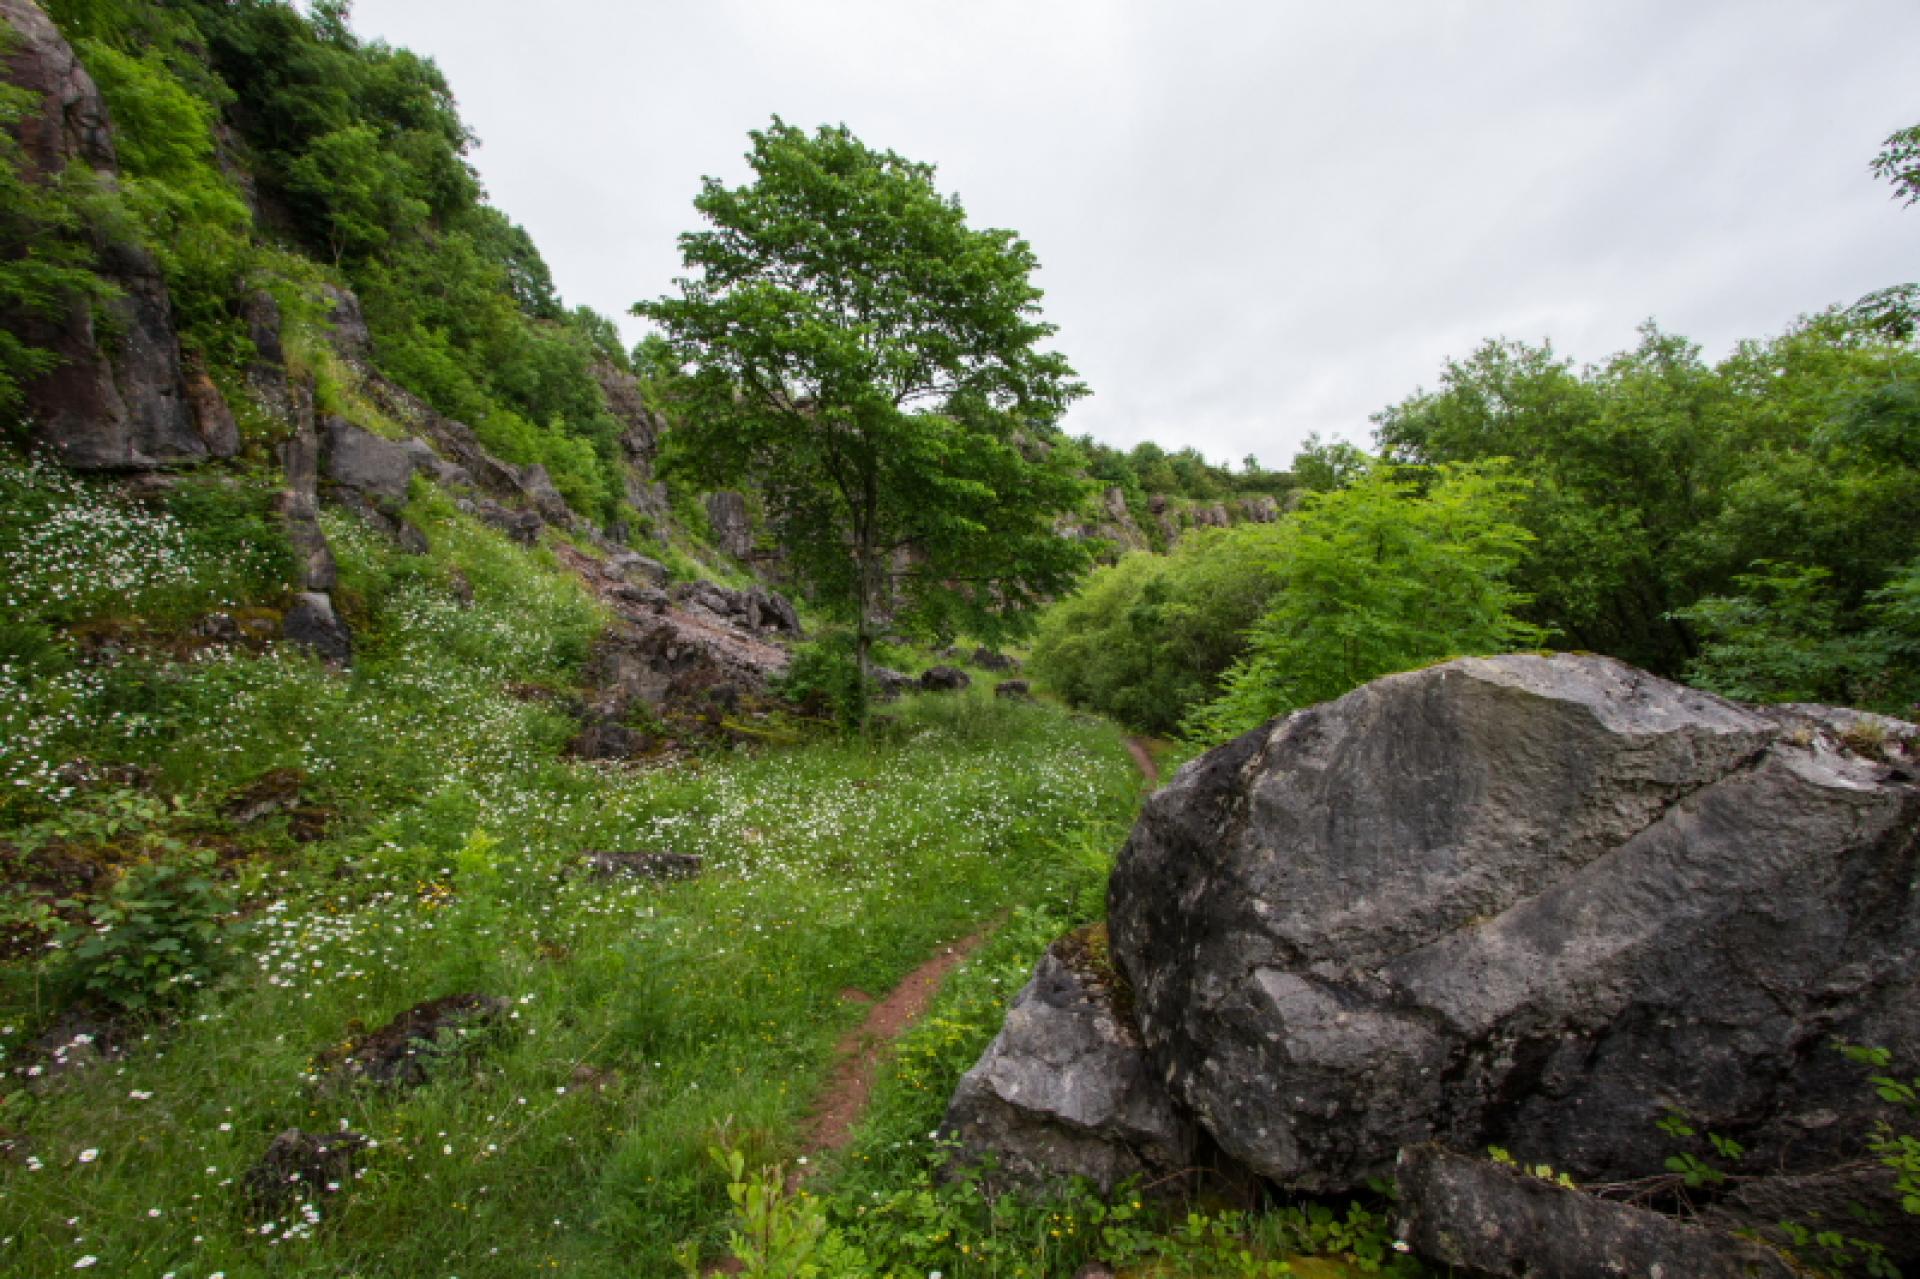 Walking trail through the greenery and rocky outcrops of Clint Quarry